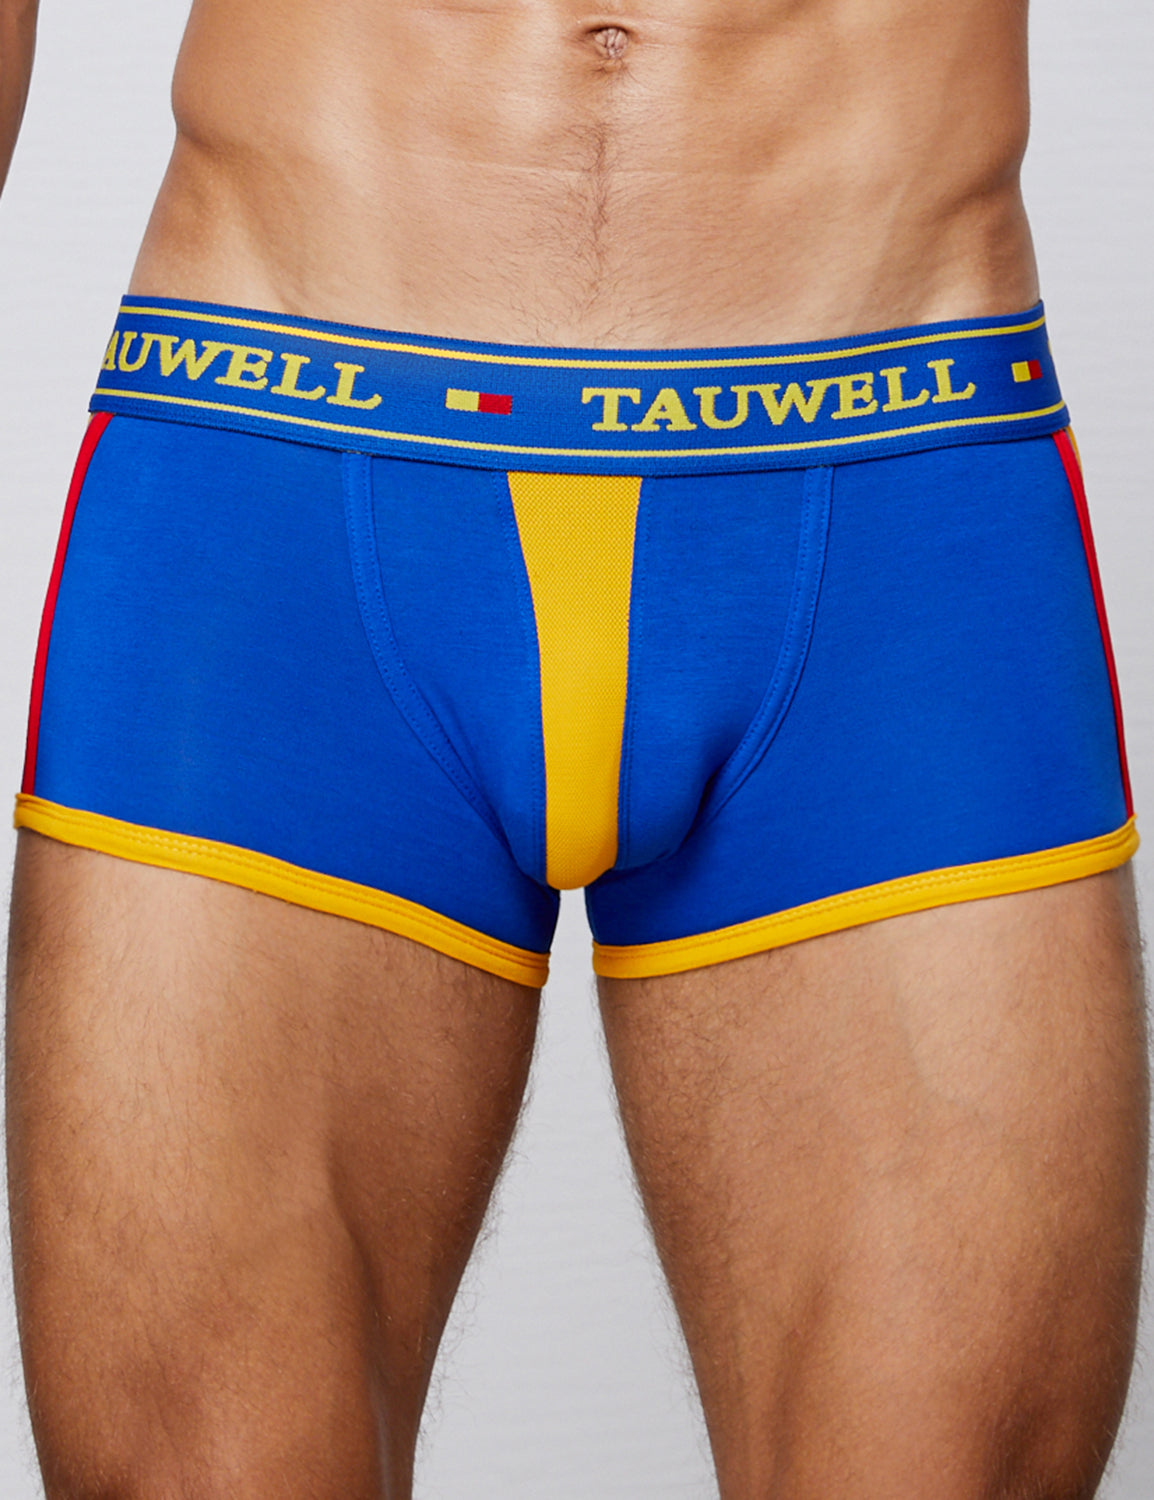 Low Rise Boxer Brief Trunks 9208